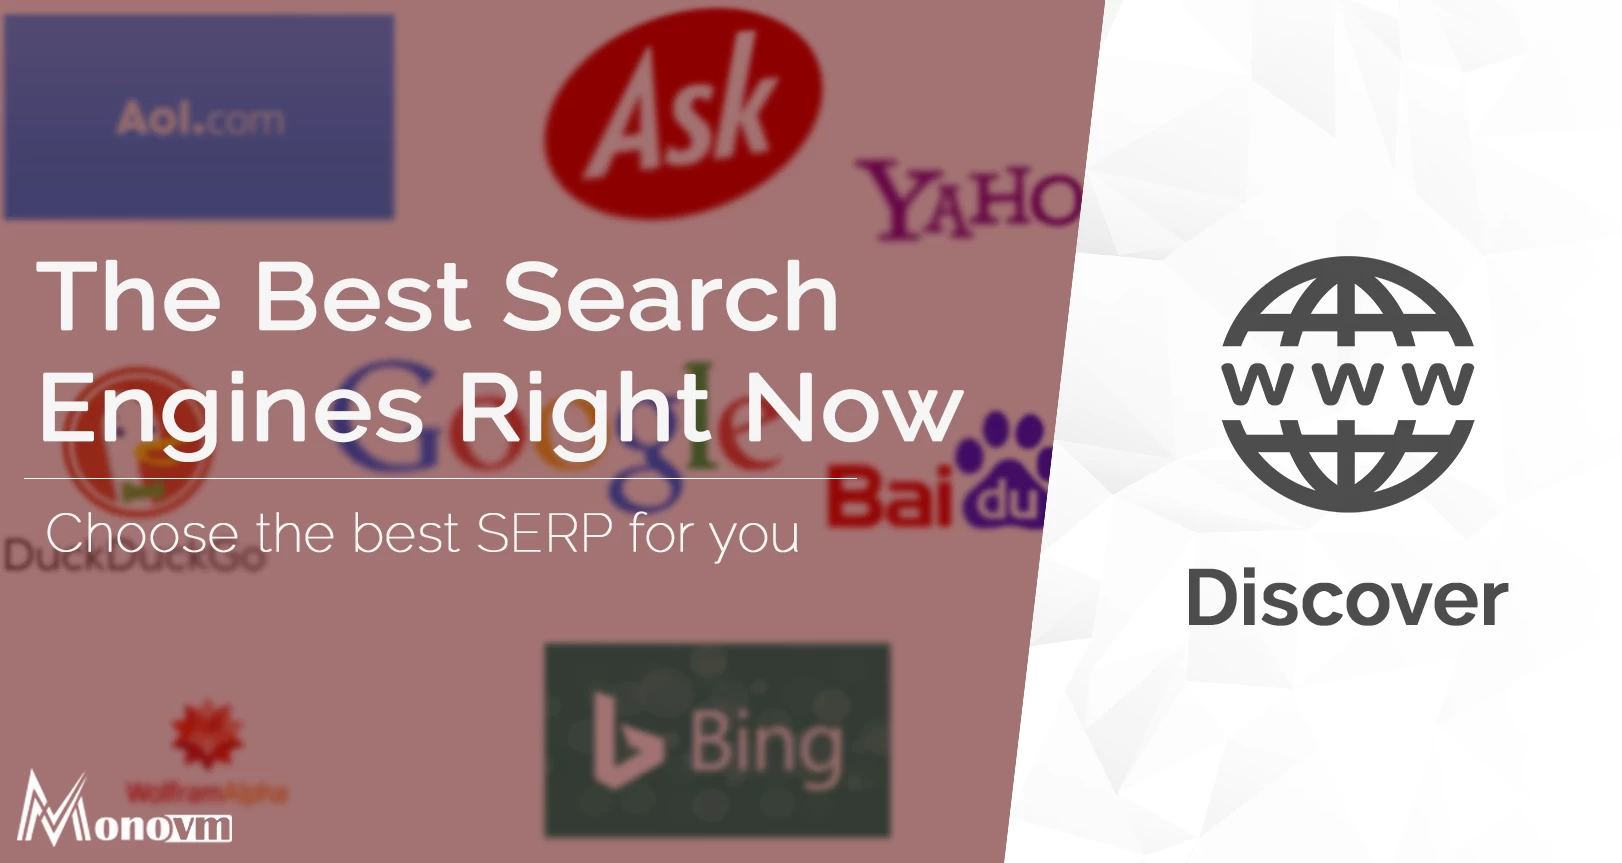 The Best Search Engines